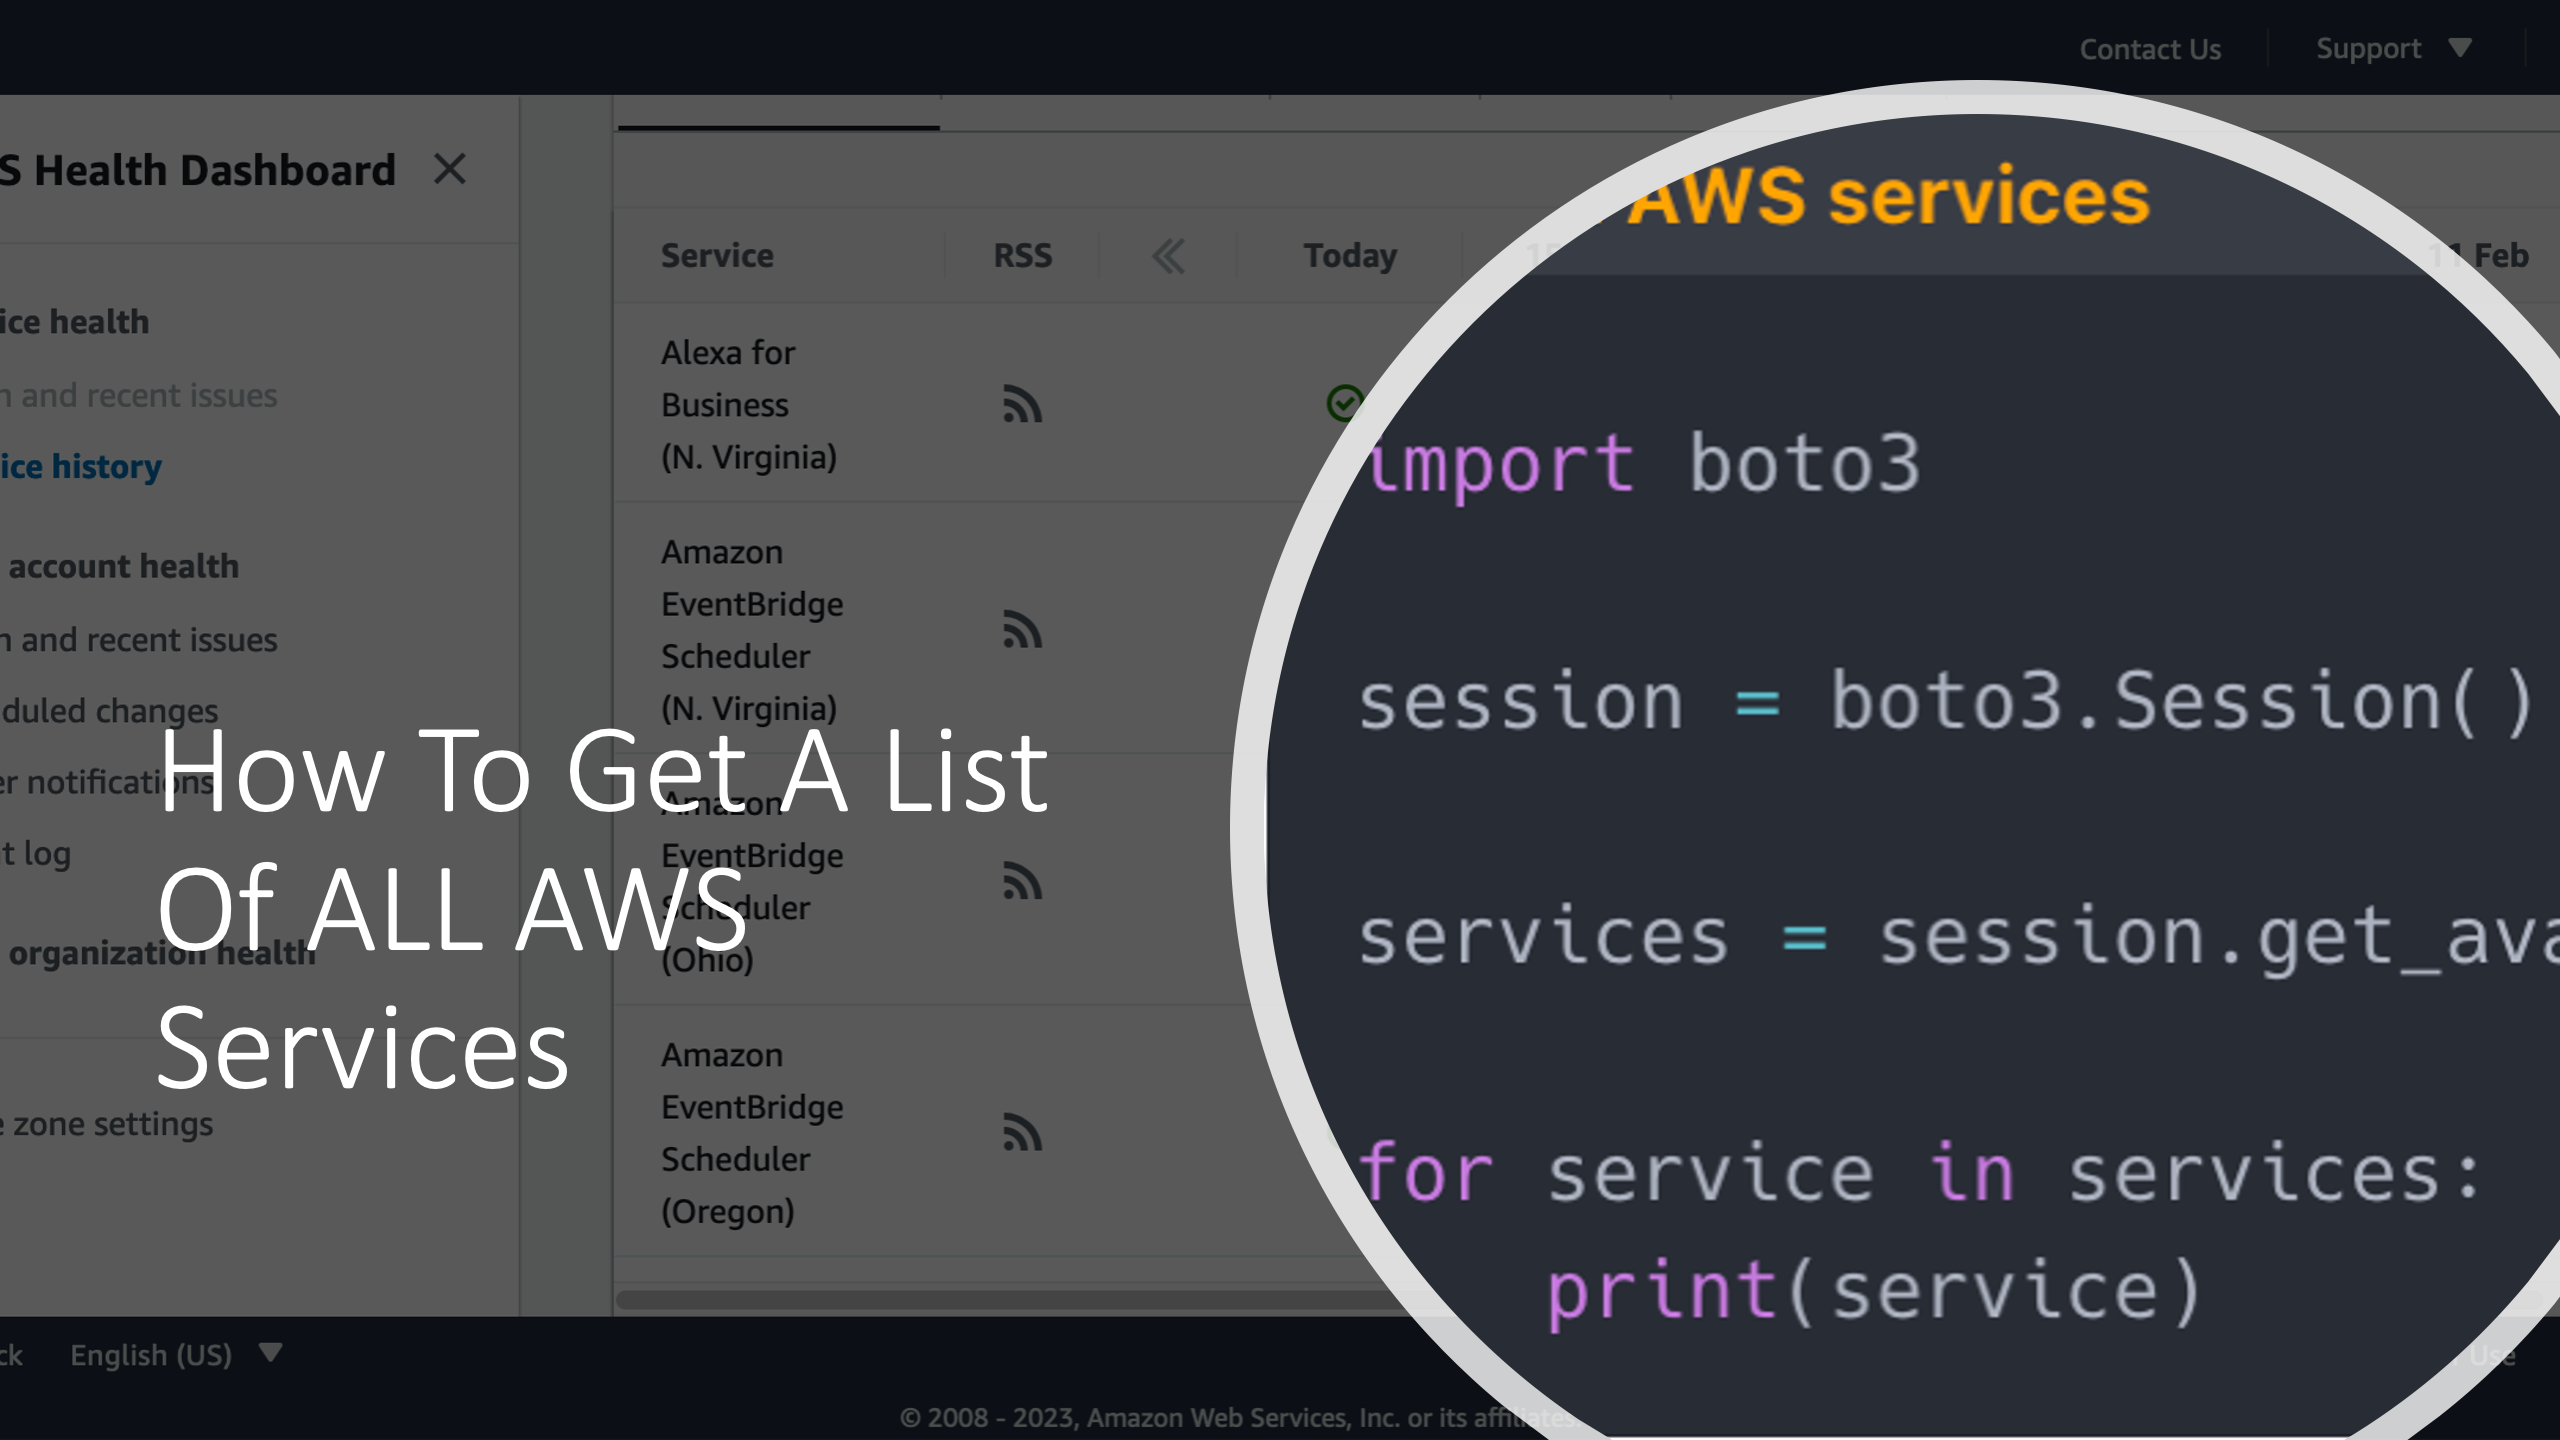 How To Get A List Of ALL AWS Services